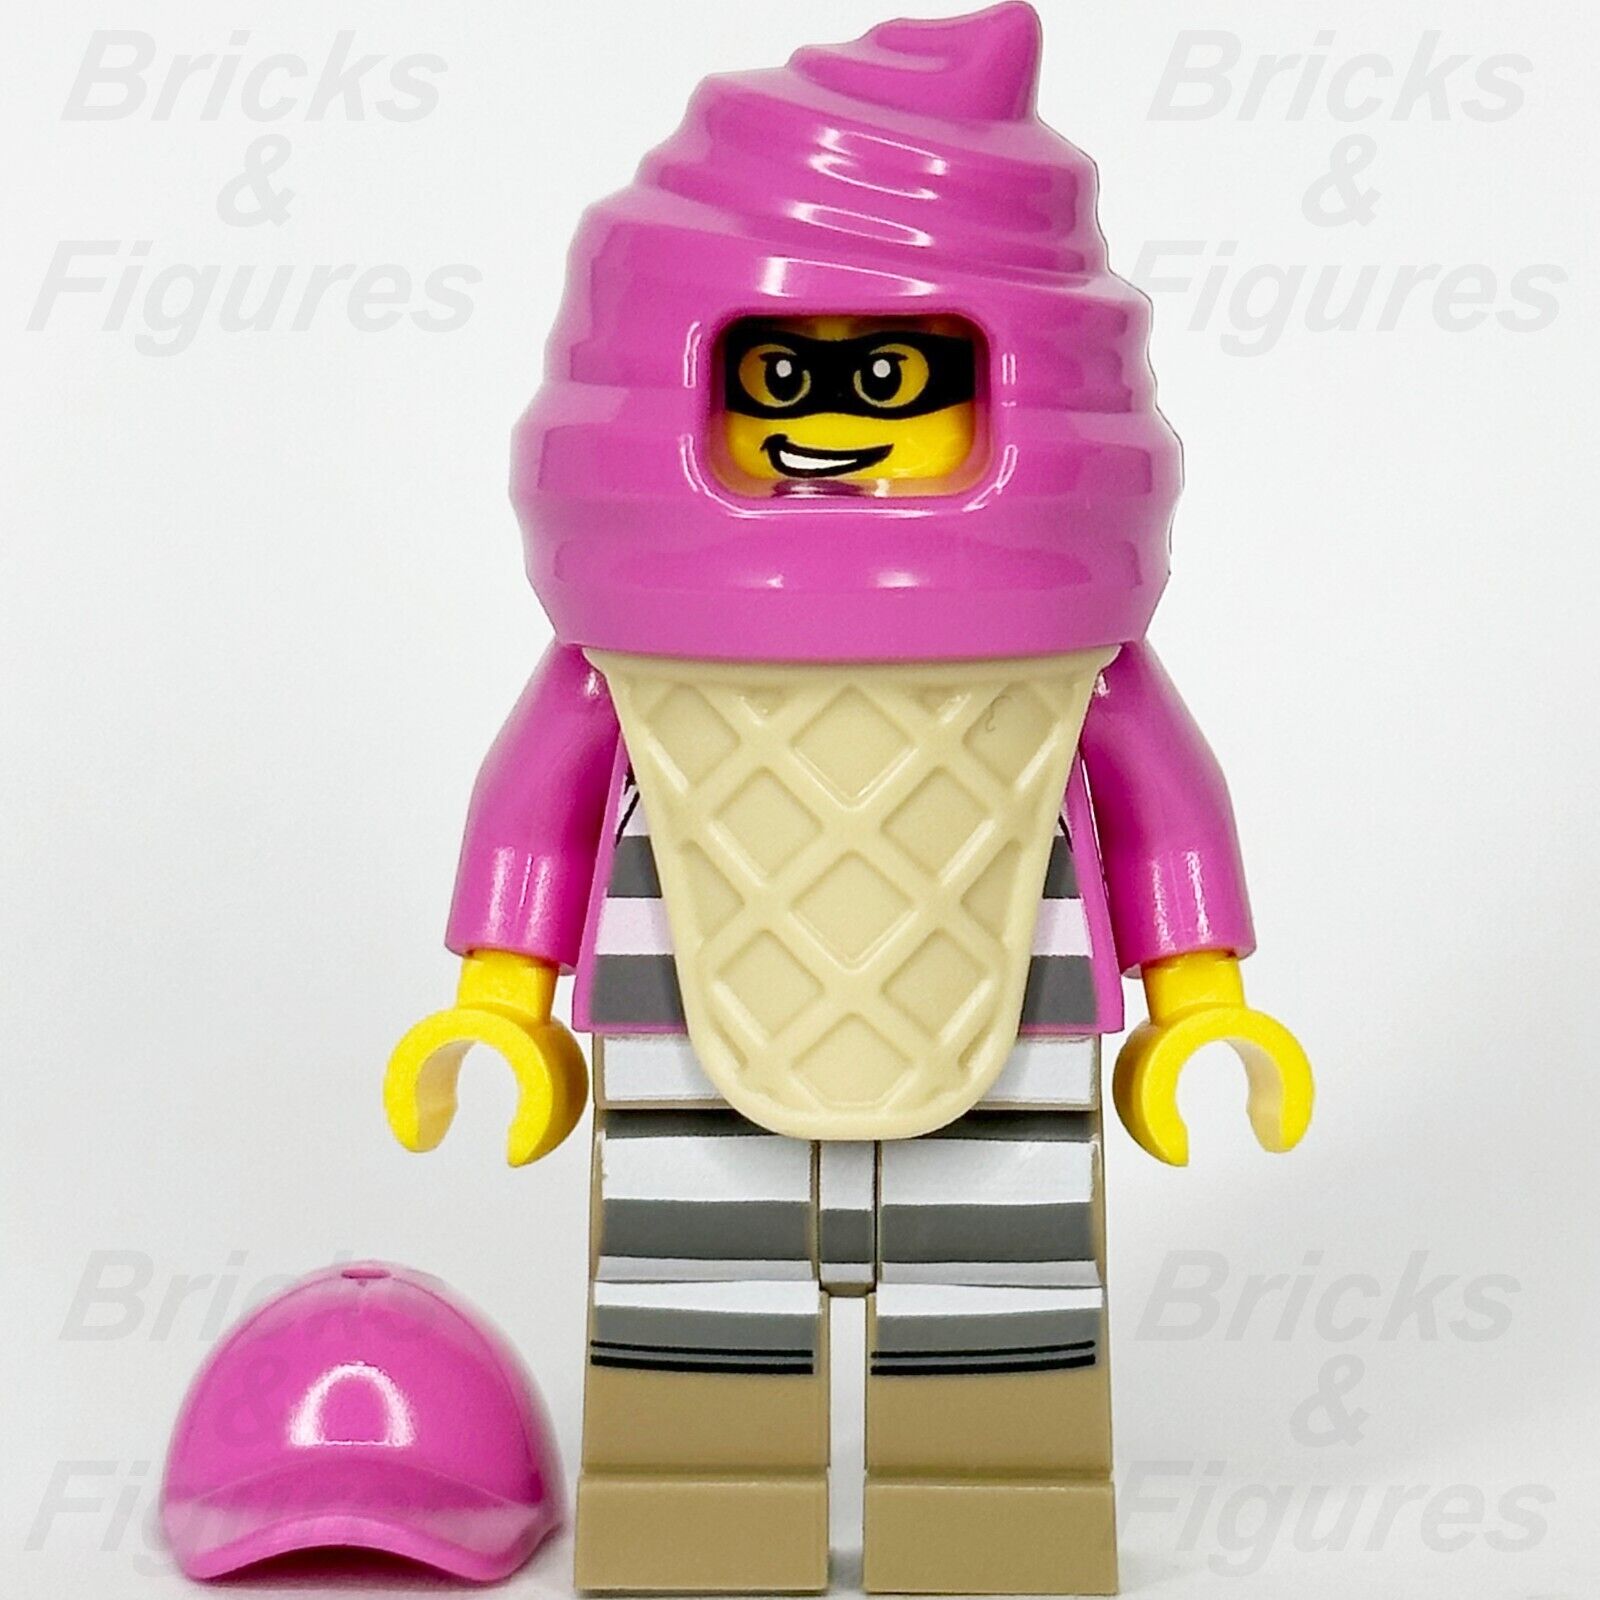 LEGO City Police Crook Cream Minifigure w/ Pink Ice Cream Outfit 60314 cty1385 3